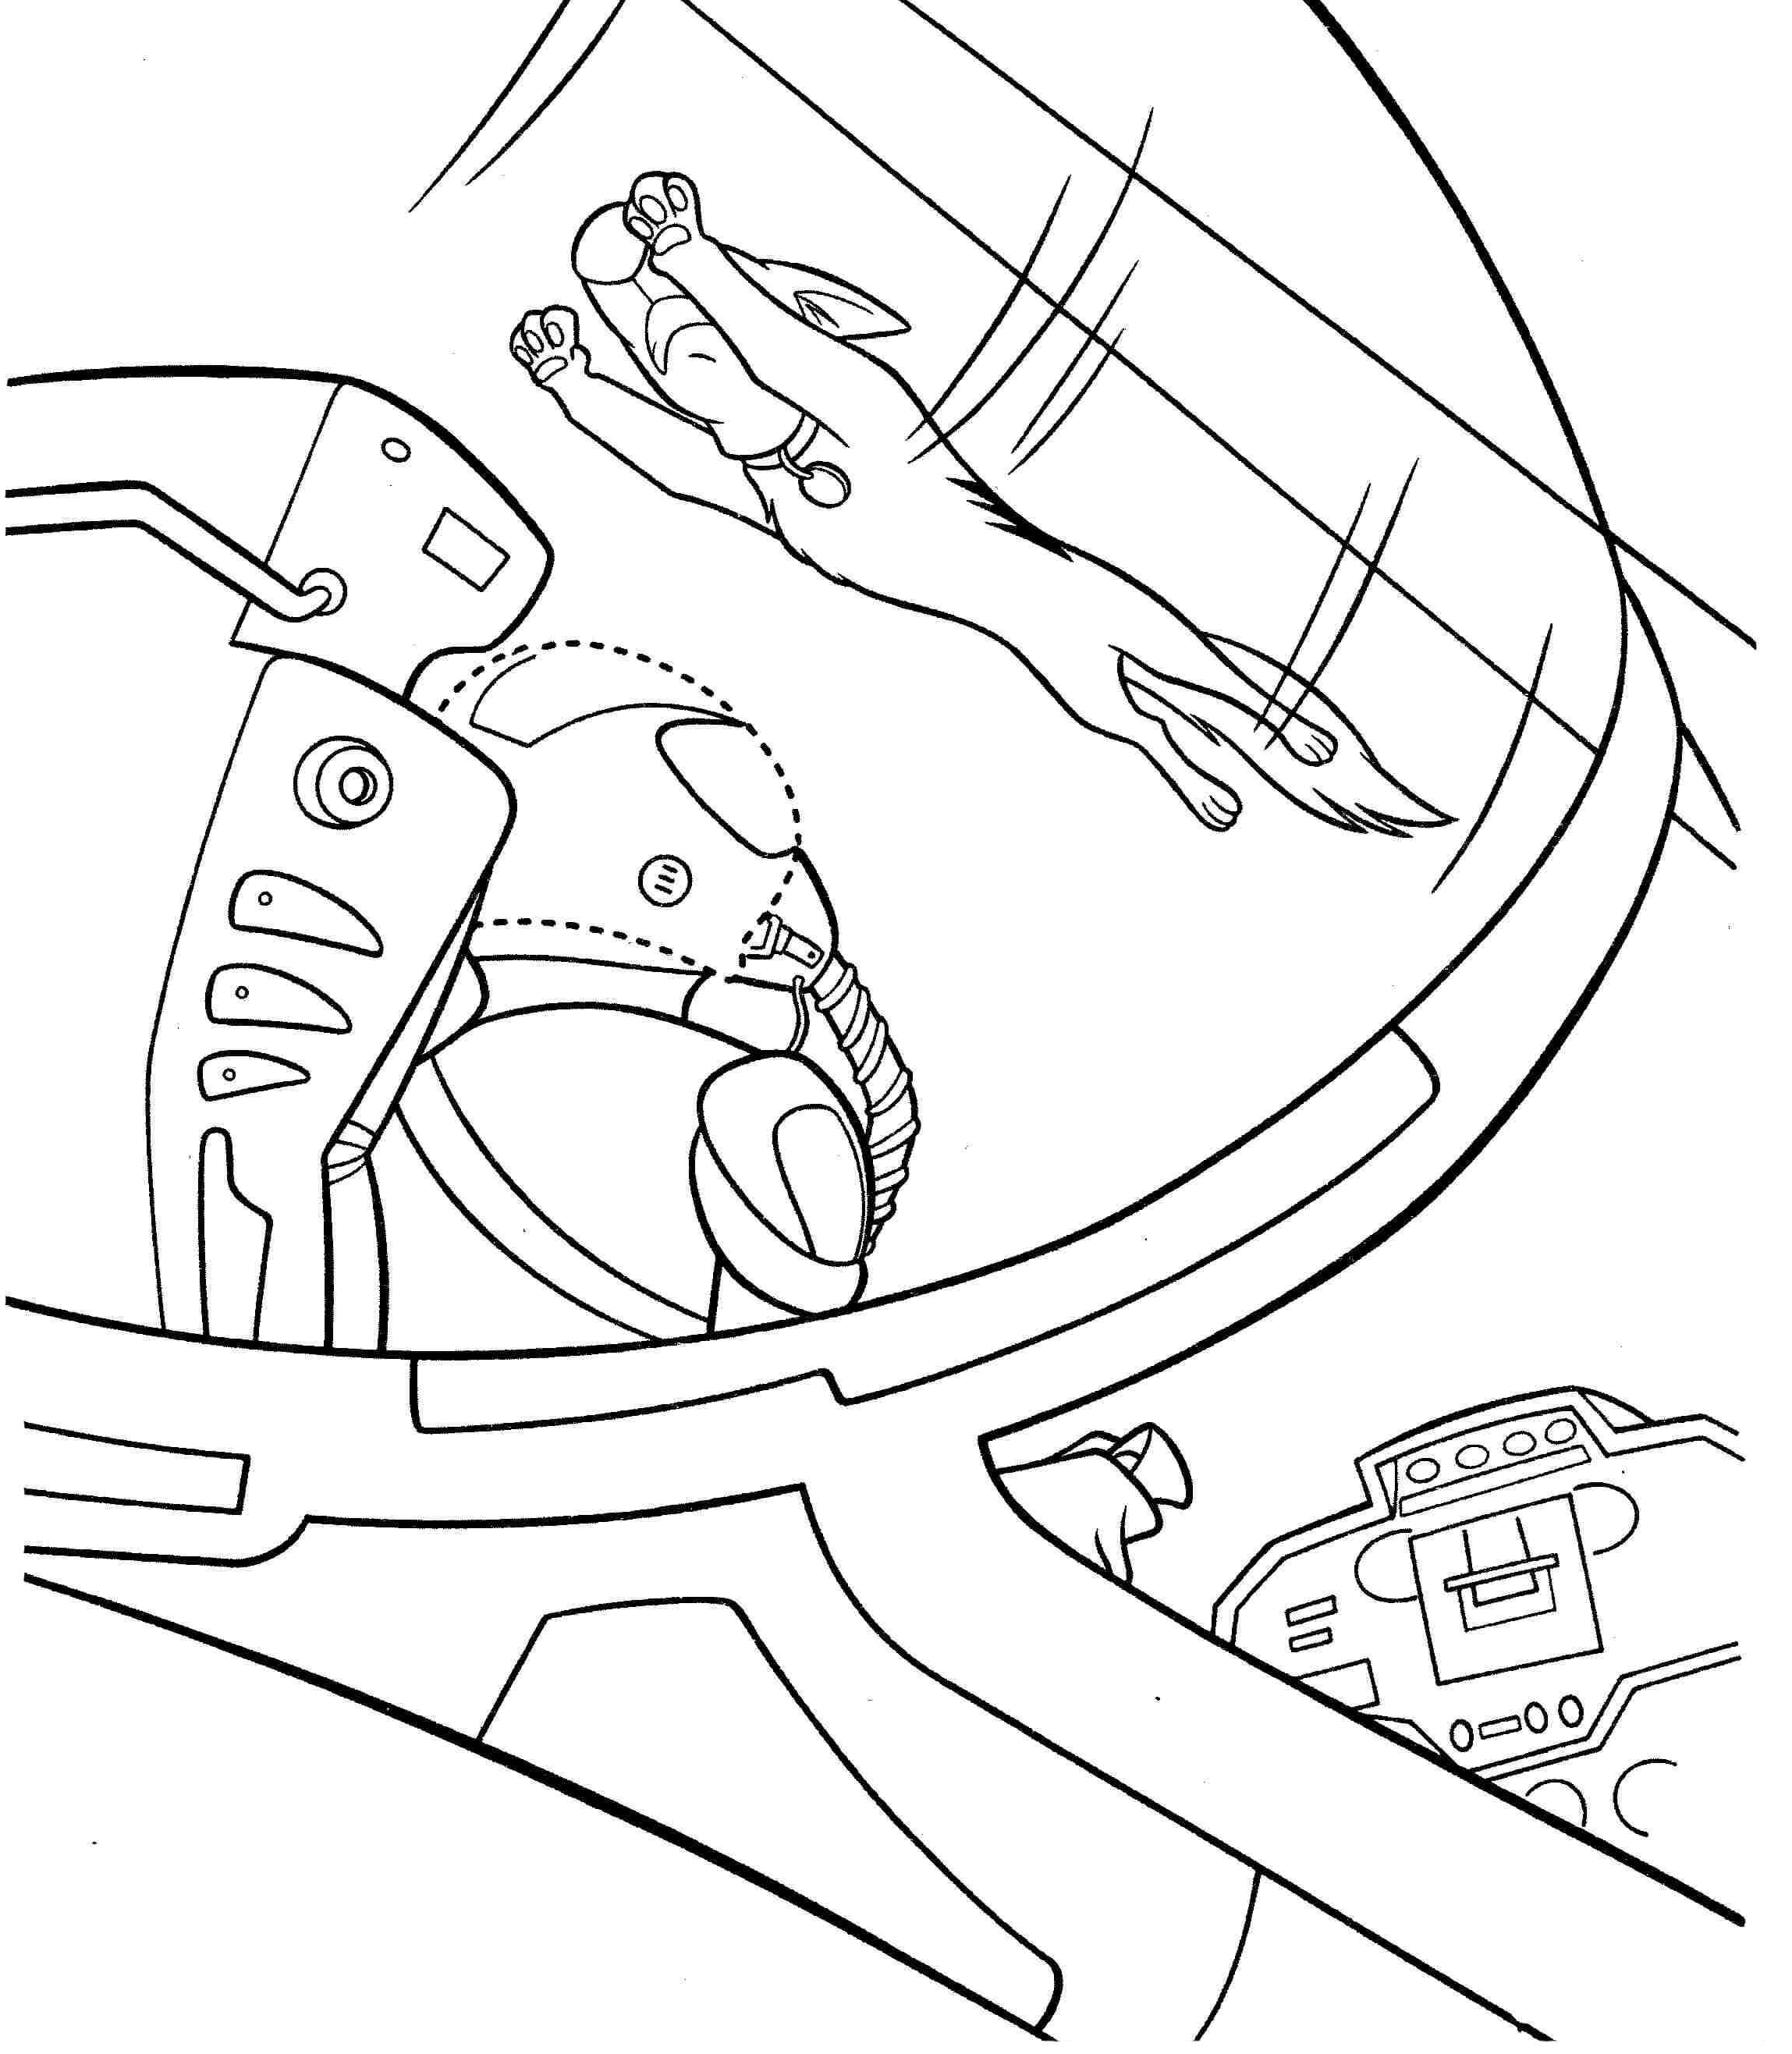 Bolt Is Jumping Super High Coloring Page